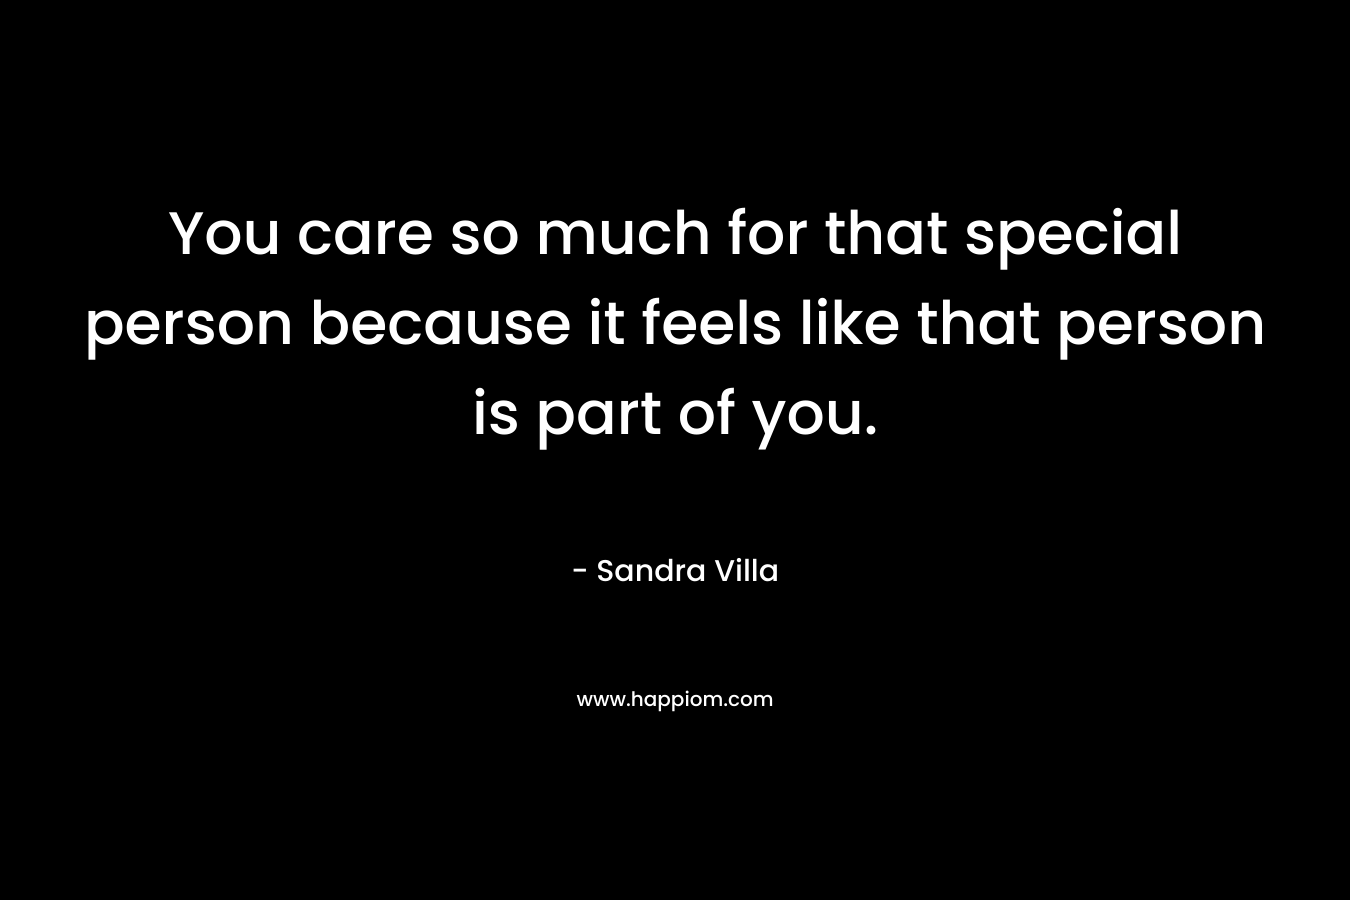 You care so much for that special person because it feels like that person is part of you.